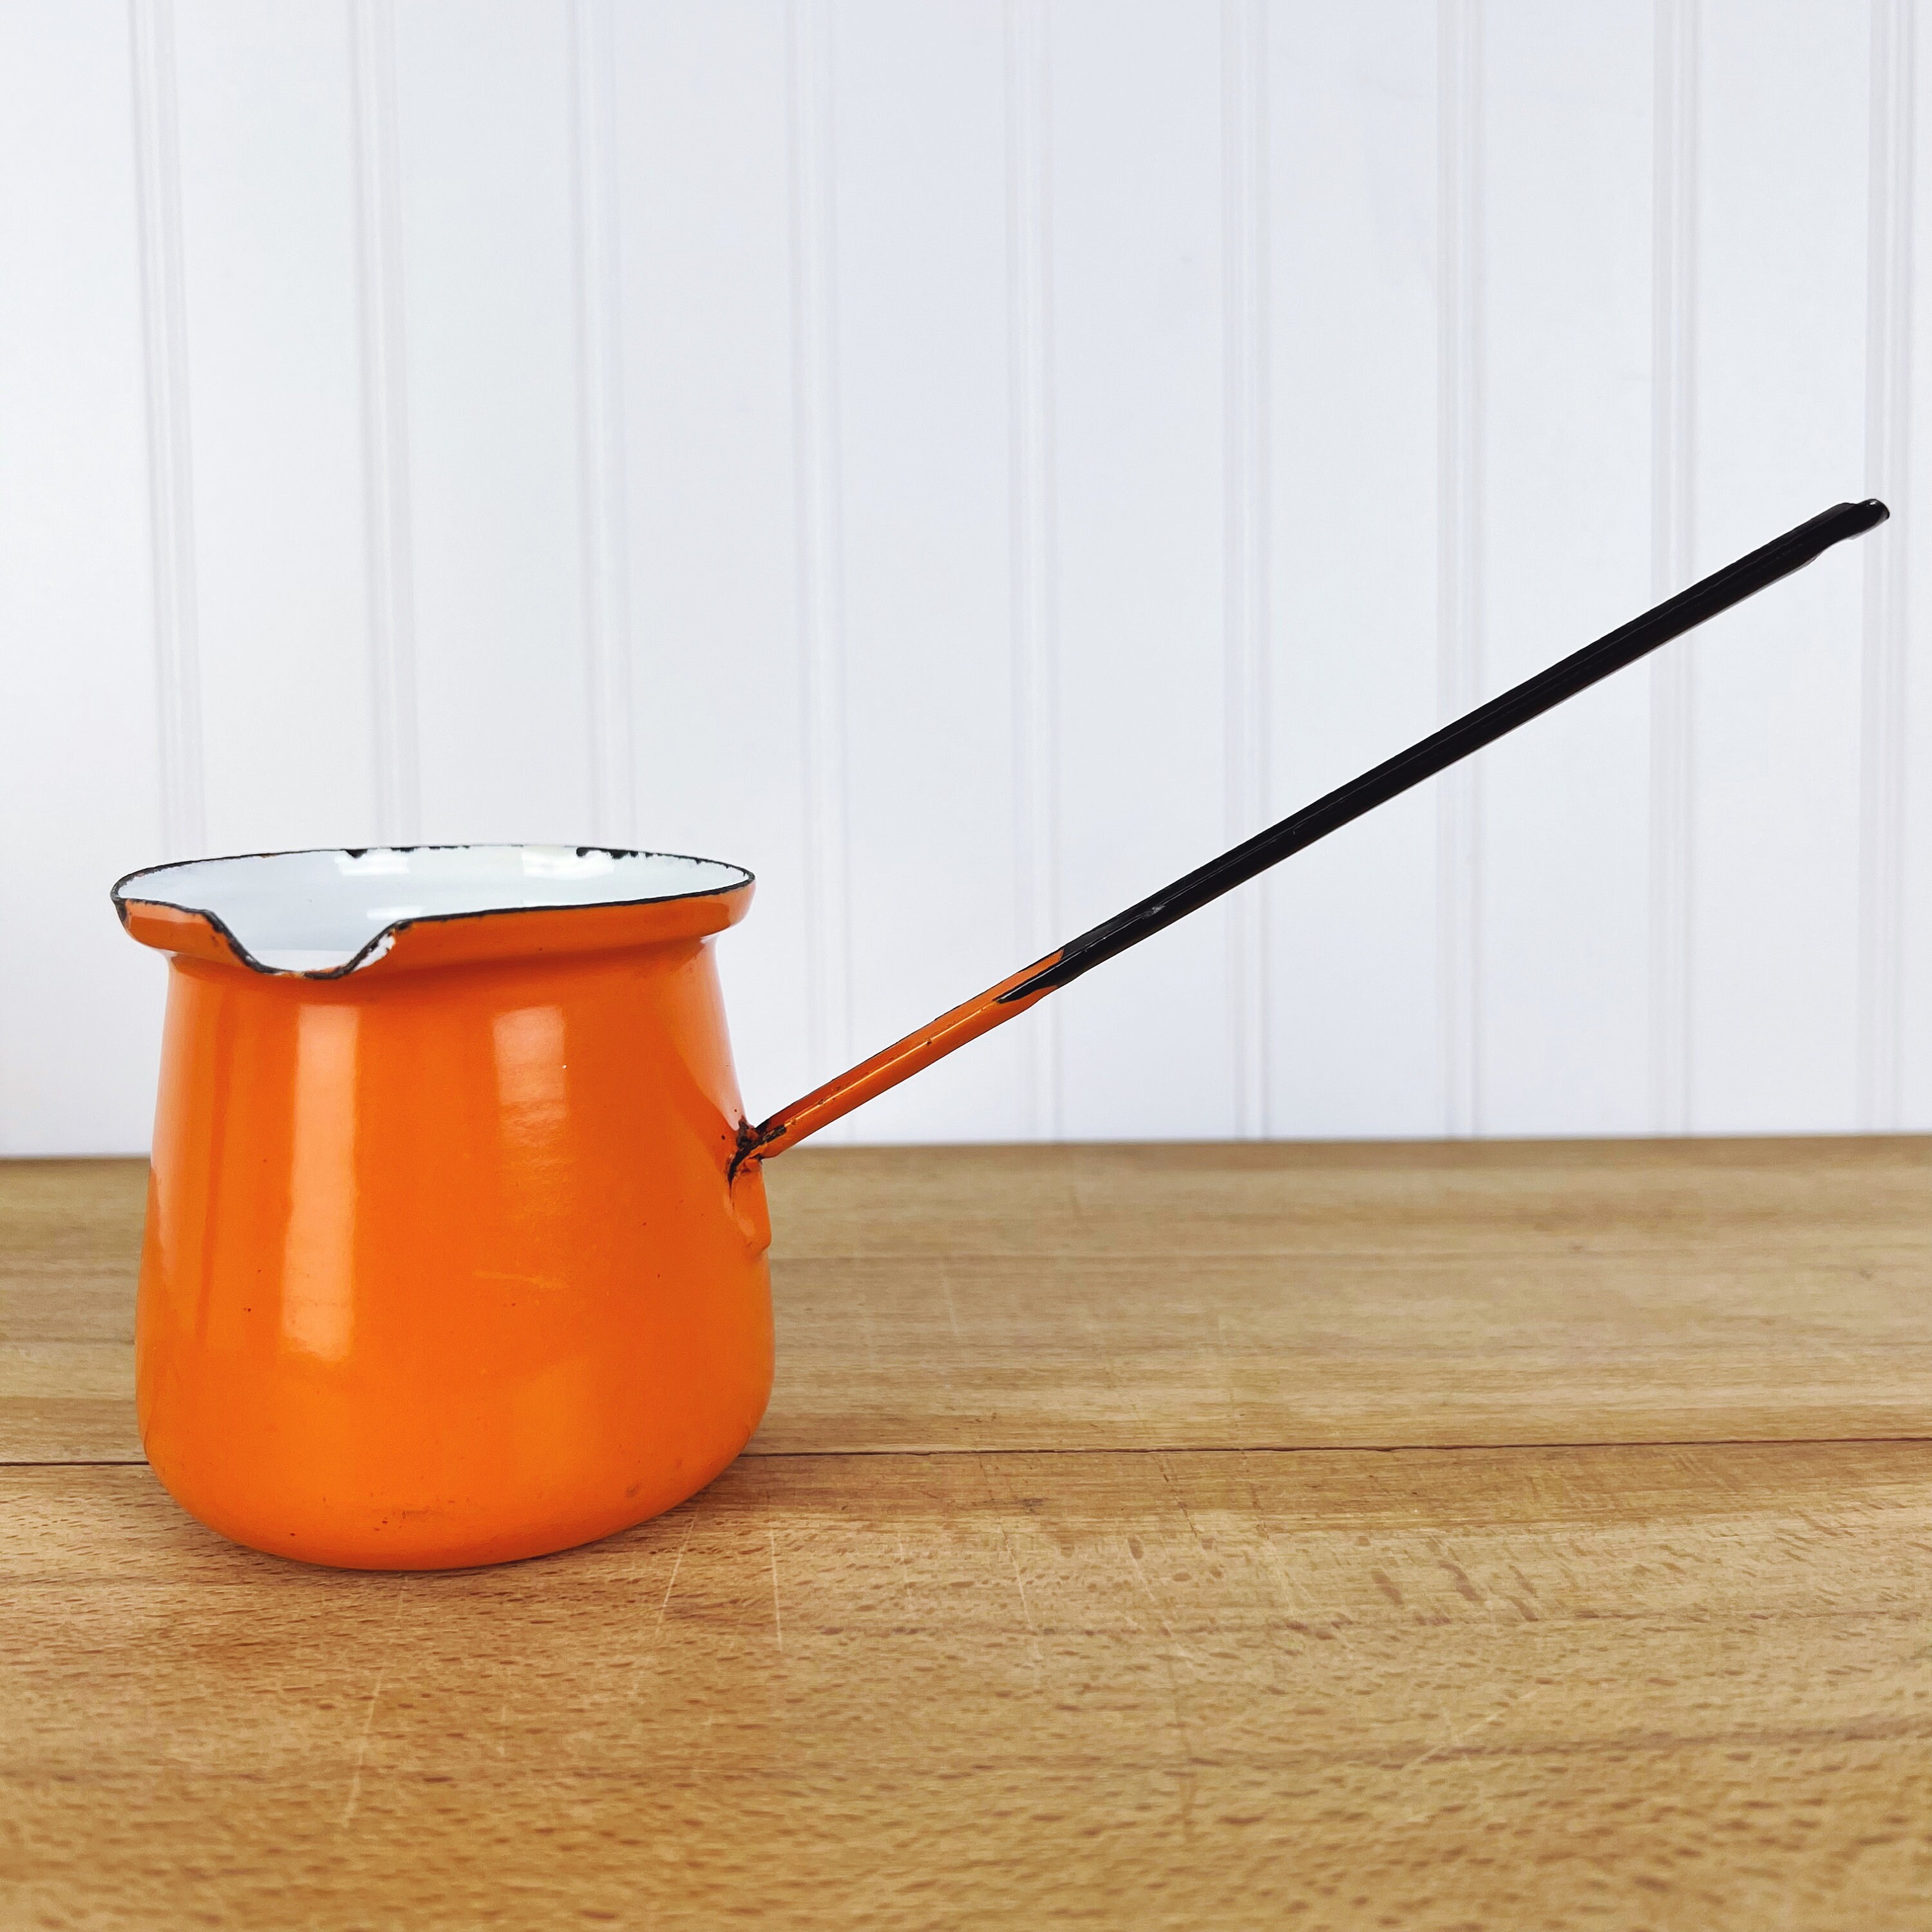 Rustic, Enamel, Bright Orange and White, Long Handled Butter Melter,  Kitchen Decor, Wall Hanging, Rustic Kitchen Tool 